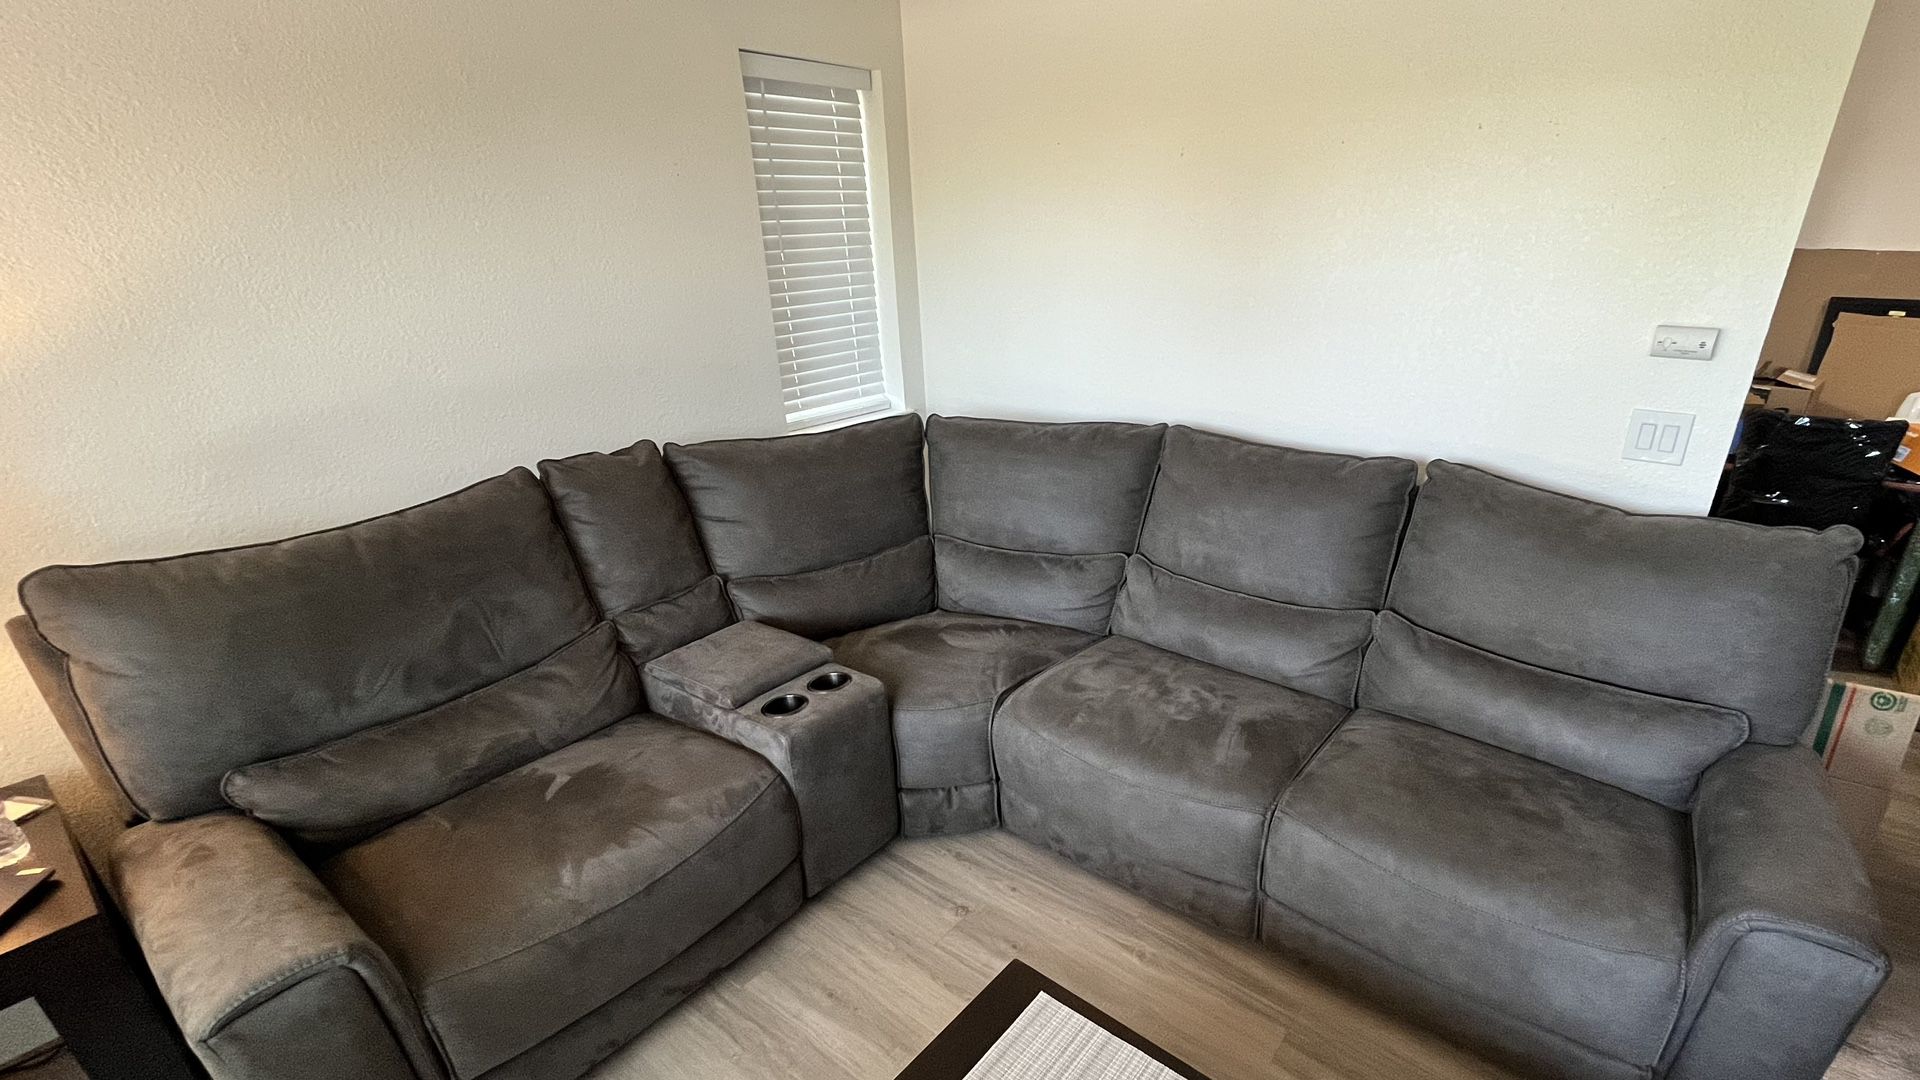 Couch For free